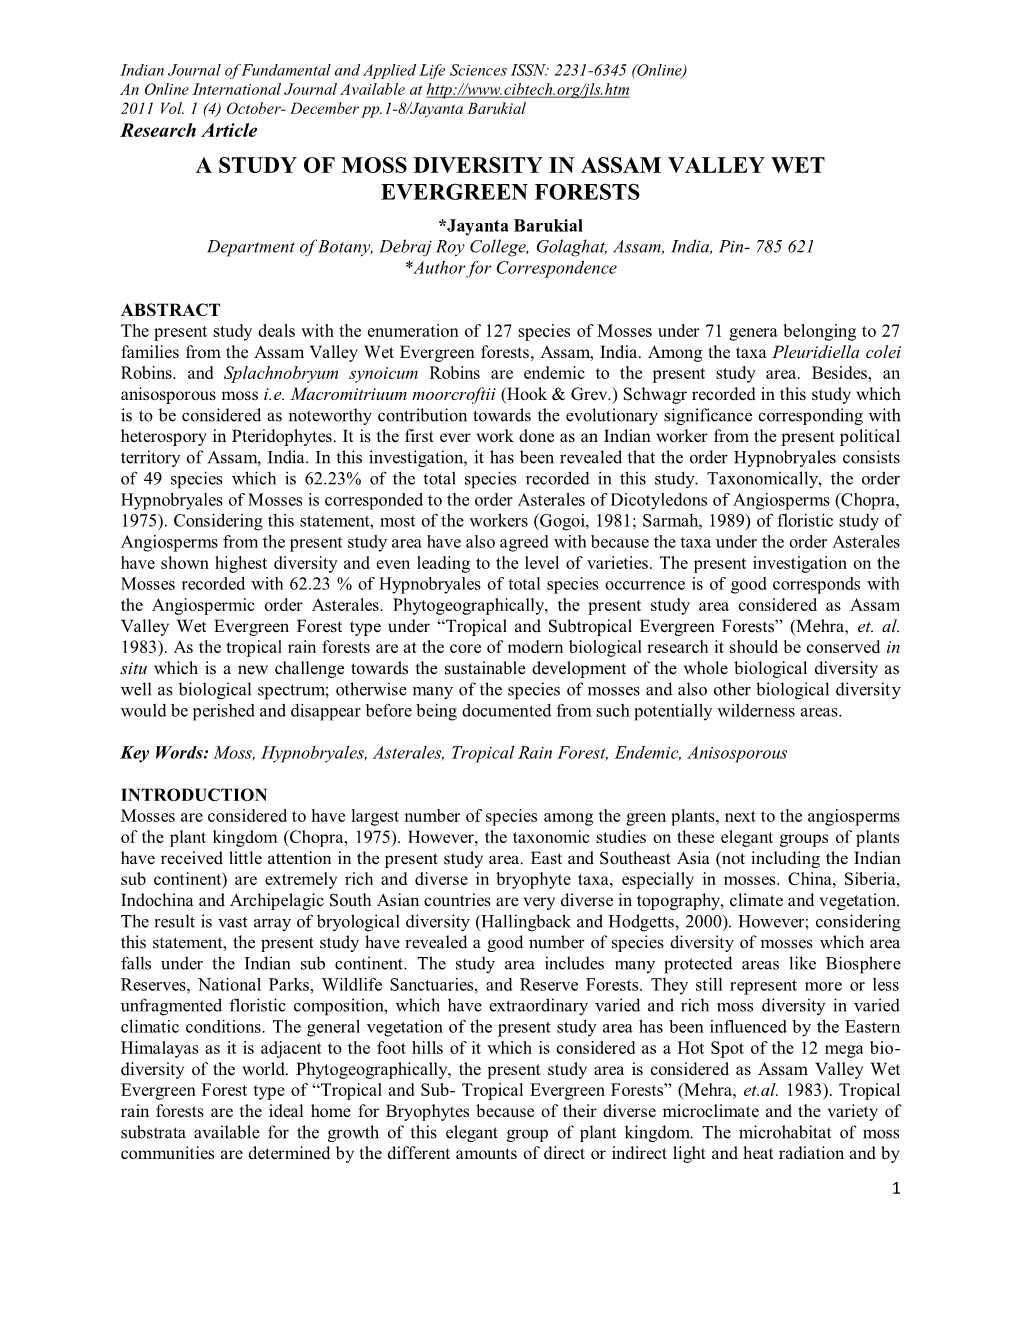 A Study of Moss Diversity in Assam Valley Wet Evergreen Forests